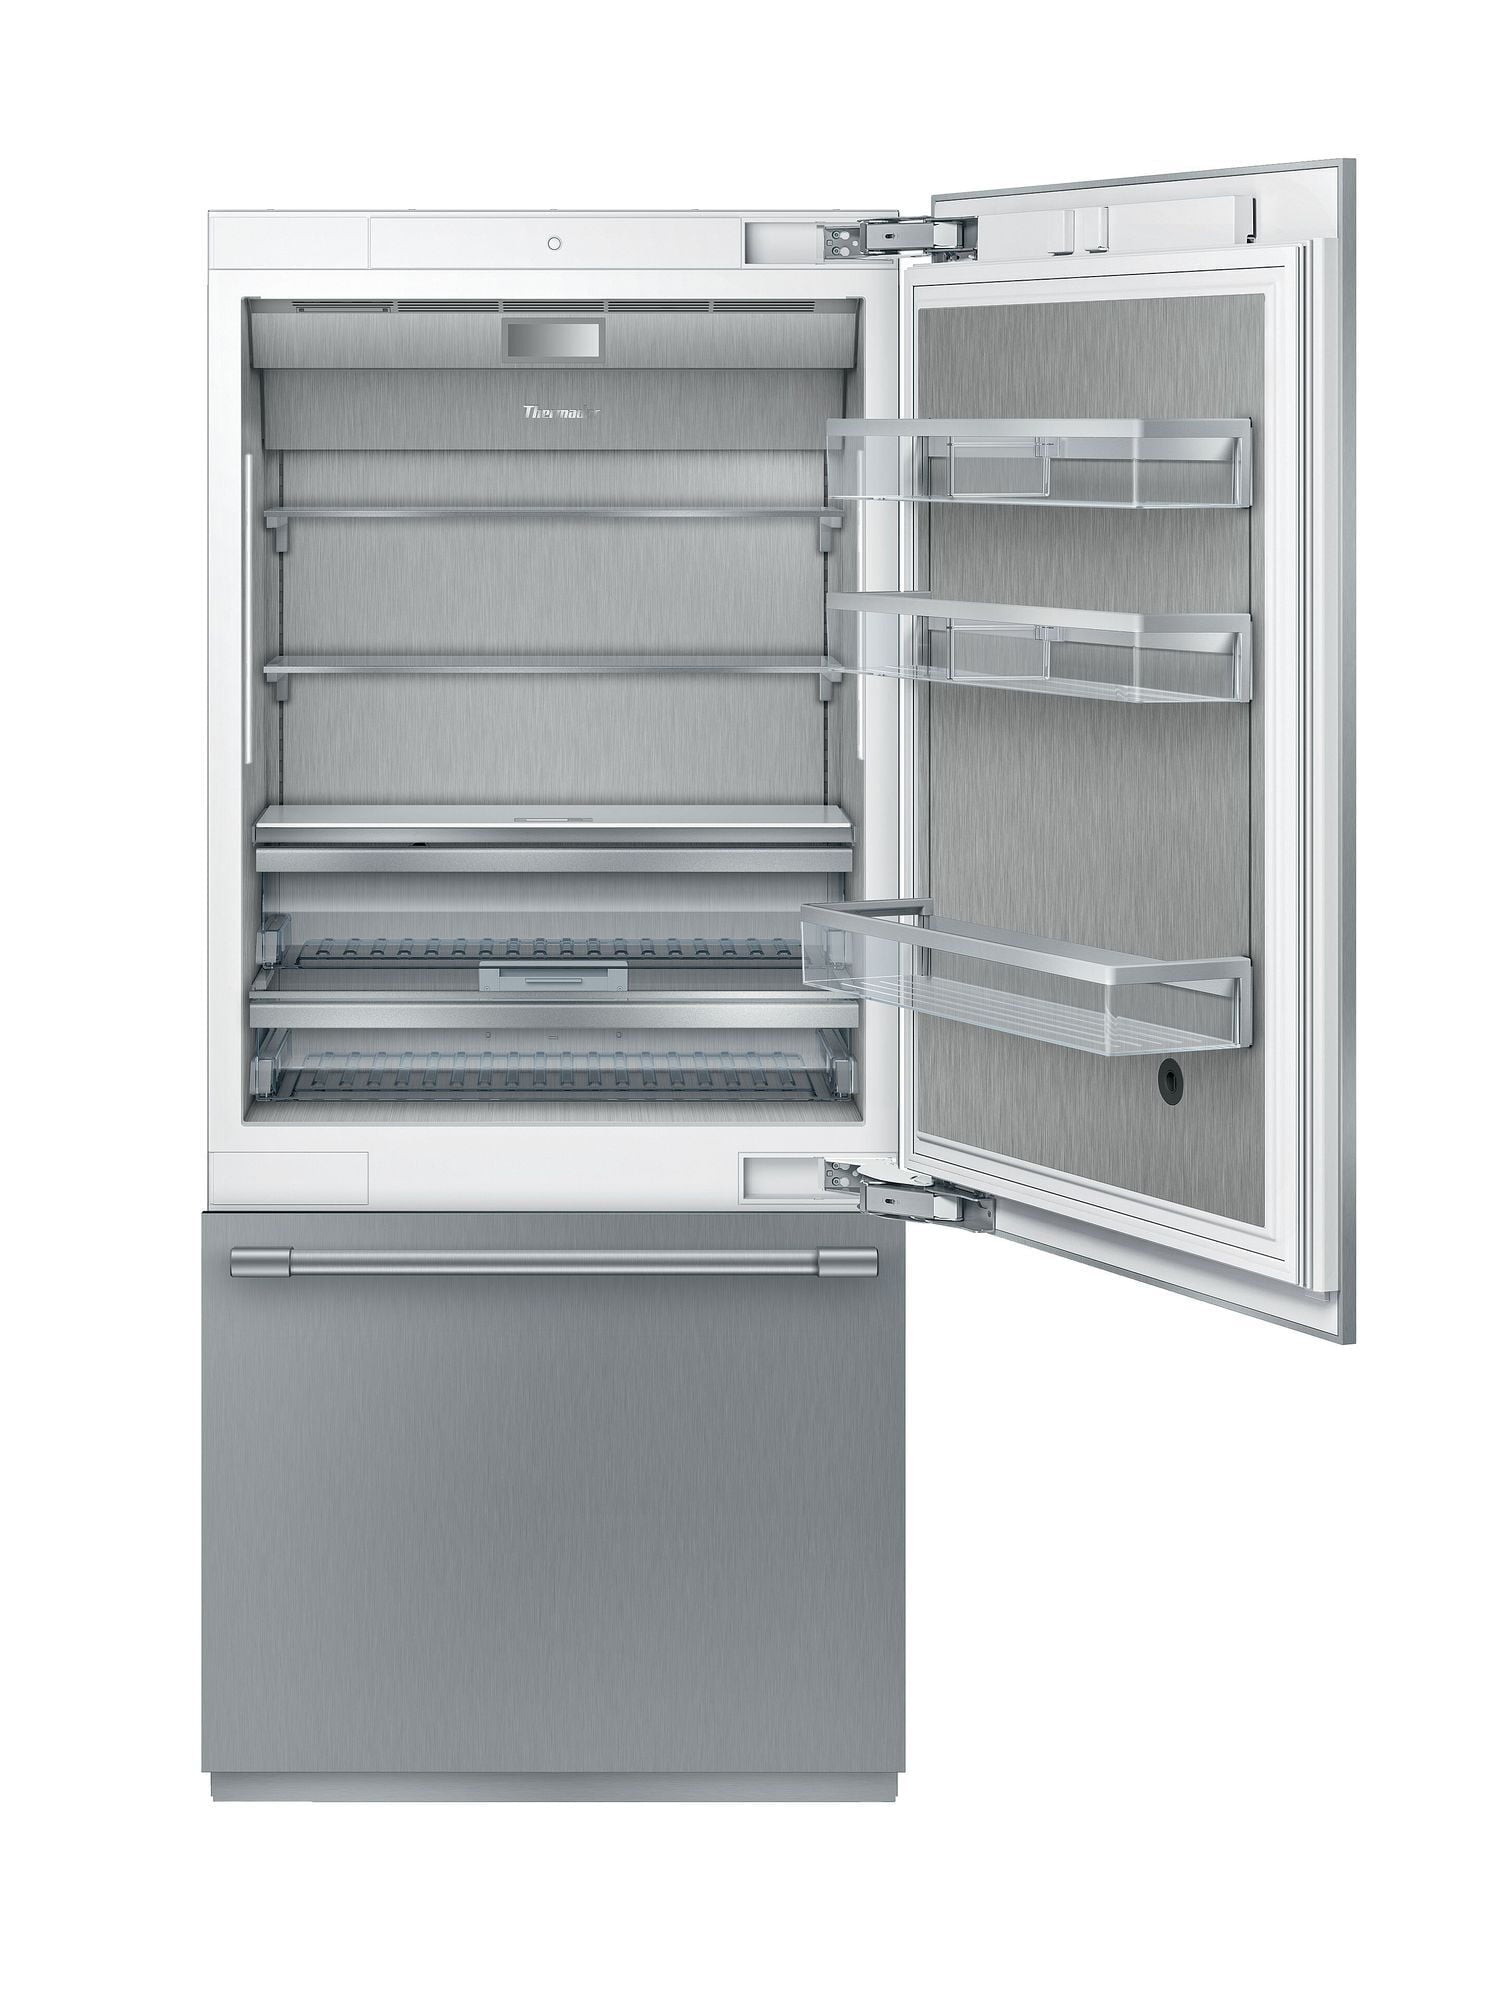 Thermador Home Appliance Blog  Thermador-fridge-and-freezer